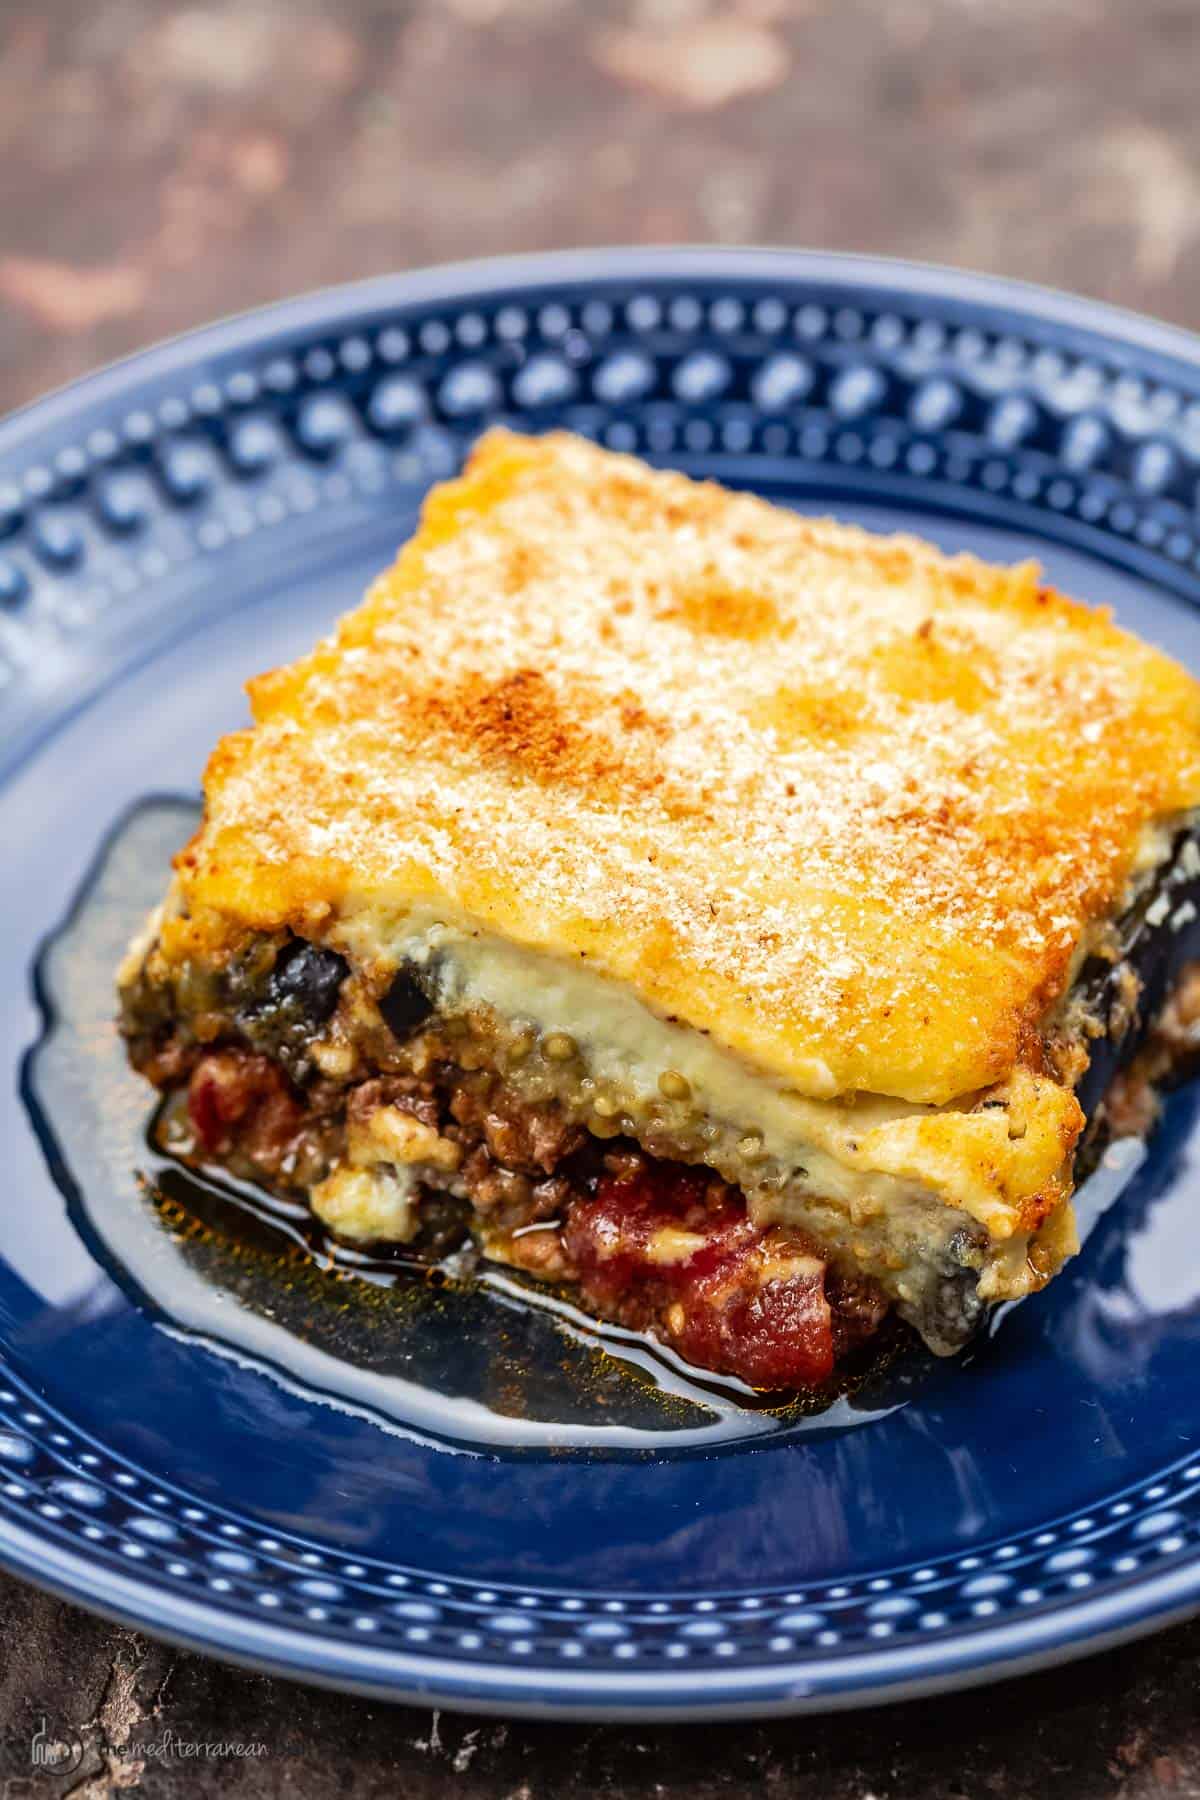 one slice of moussaka with eggplant, meat sauce, and bechamel on a blue plate